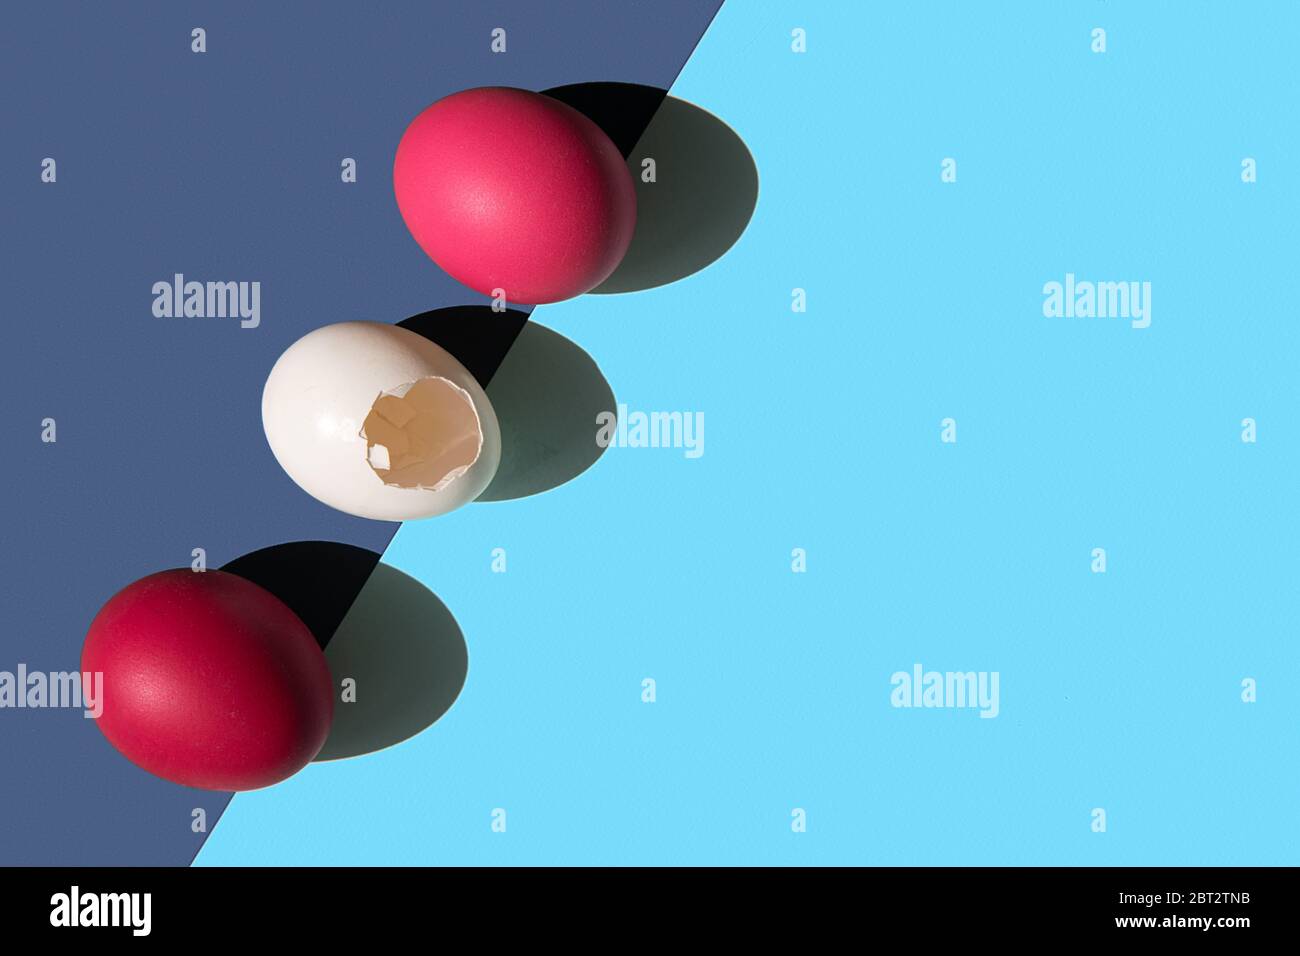 Three eggs are laid on the edge of the frame in a row. One egg is white. the shell of a white egg has a hole. Stock Photo